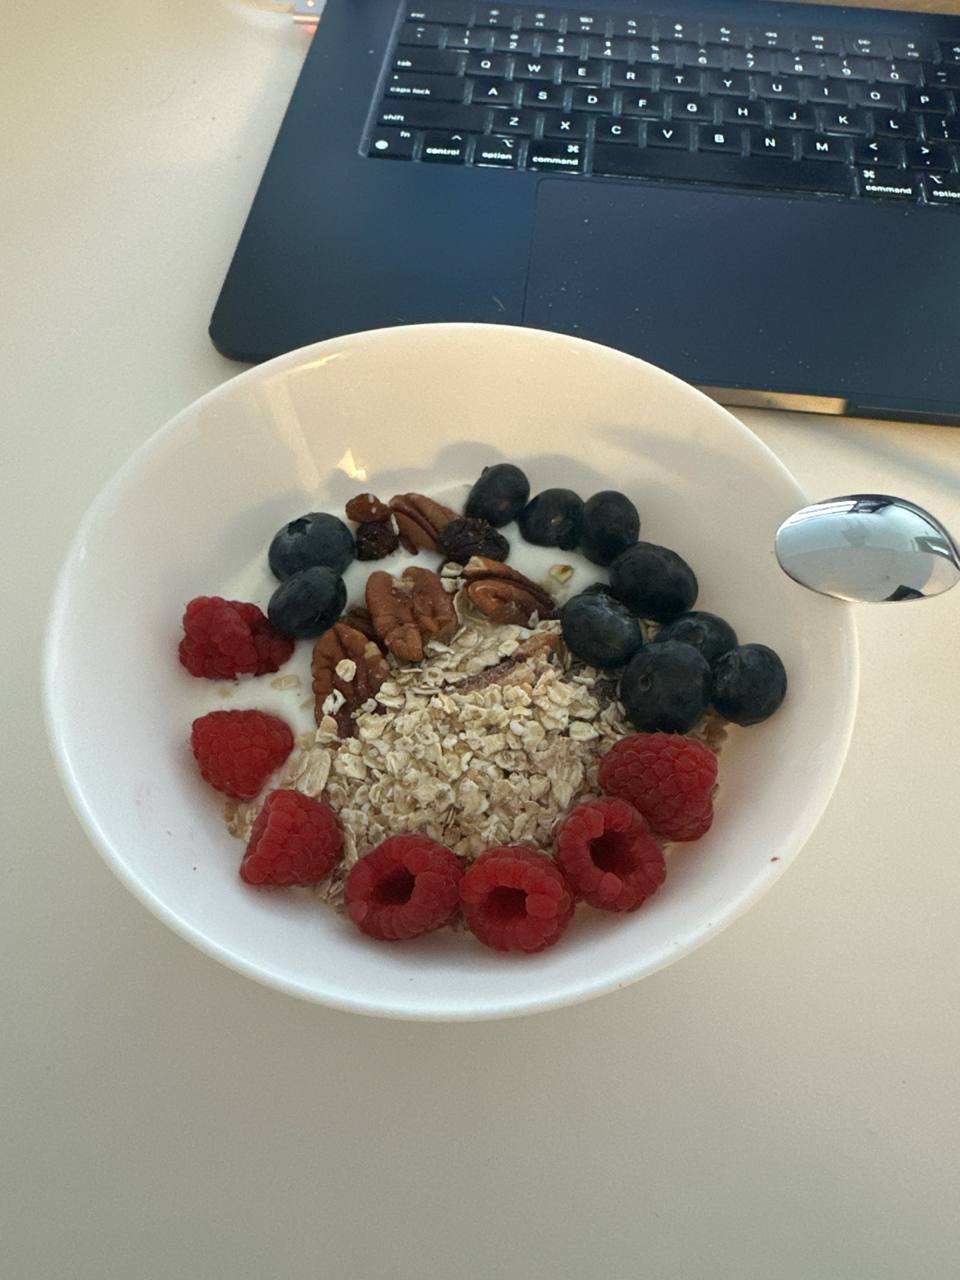 Yogurt Bowl With Berries, Oats, And Nuts